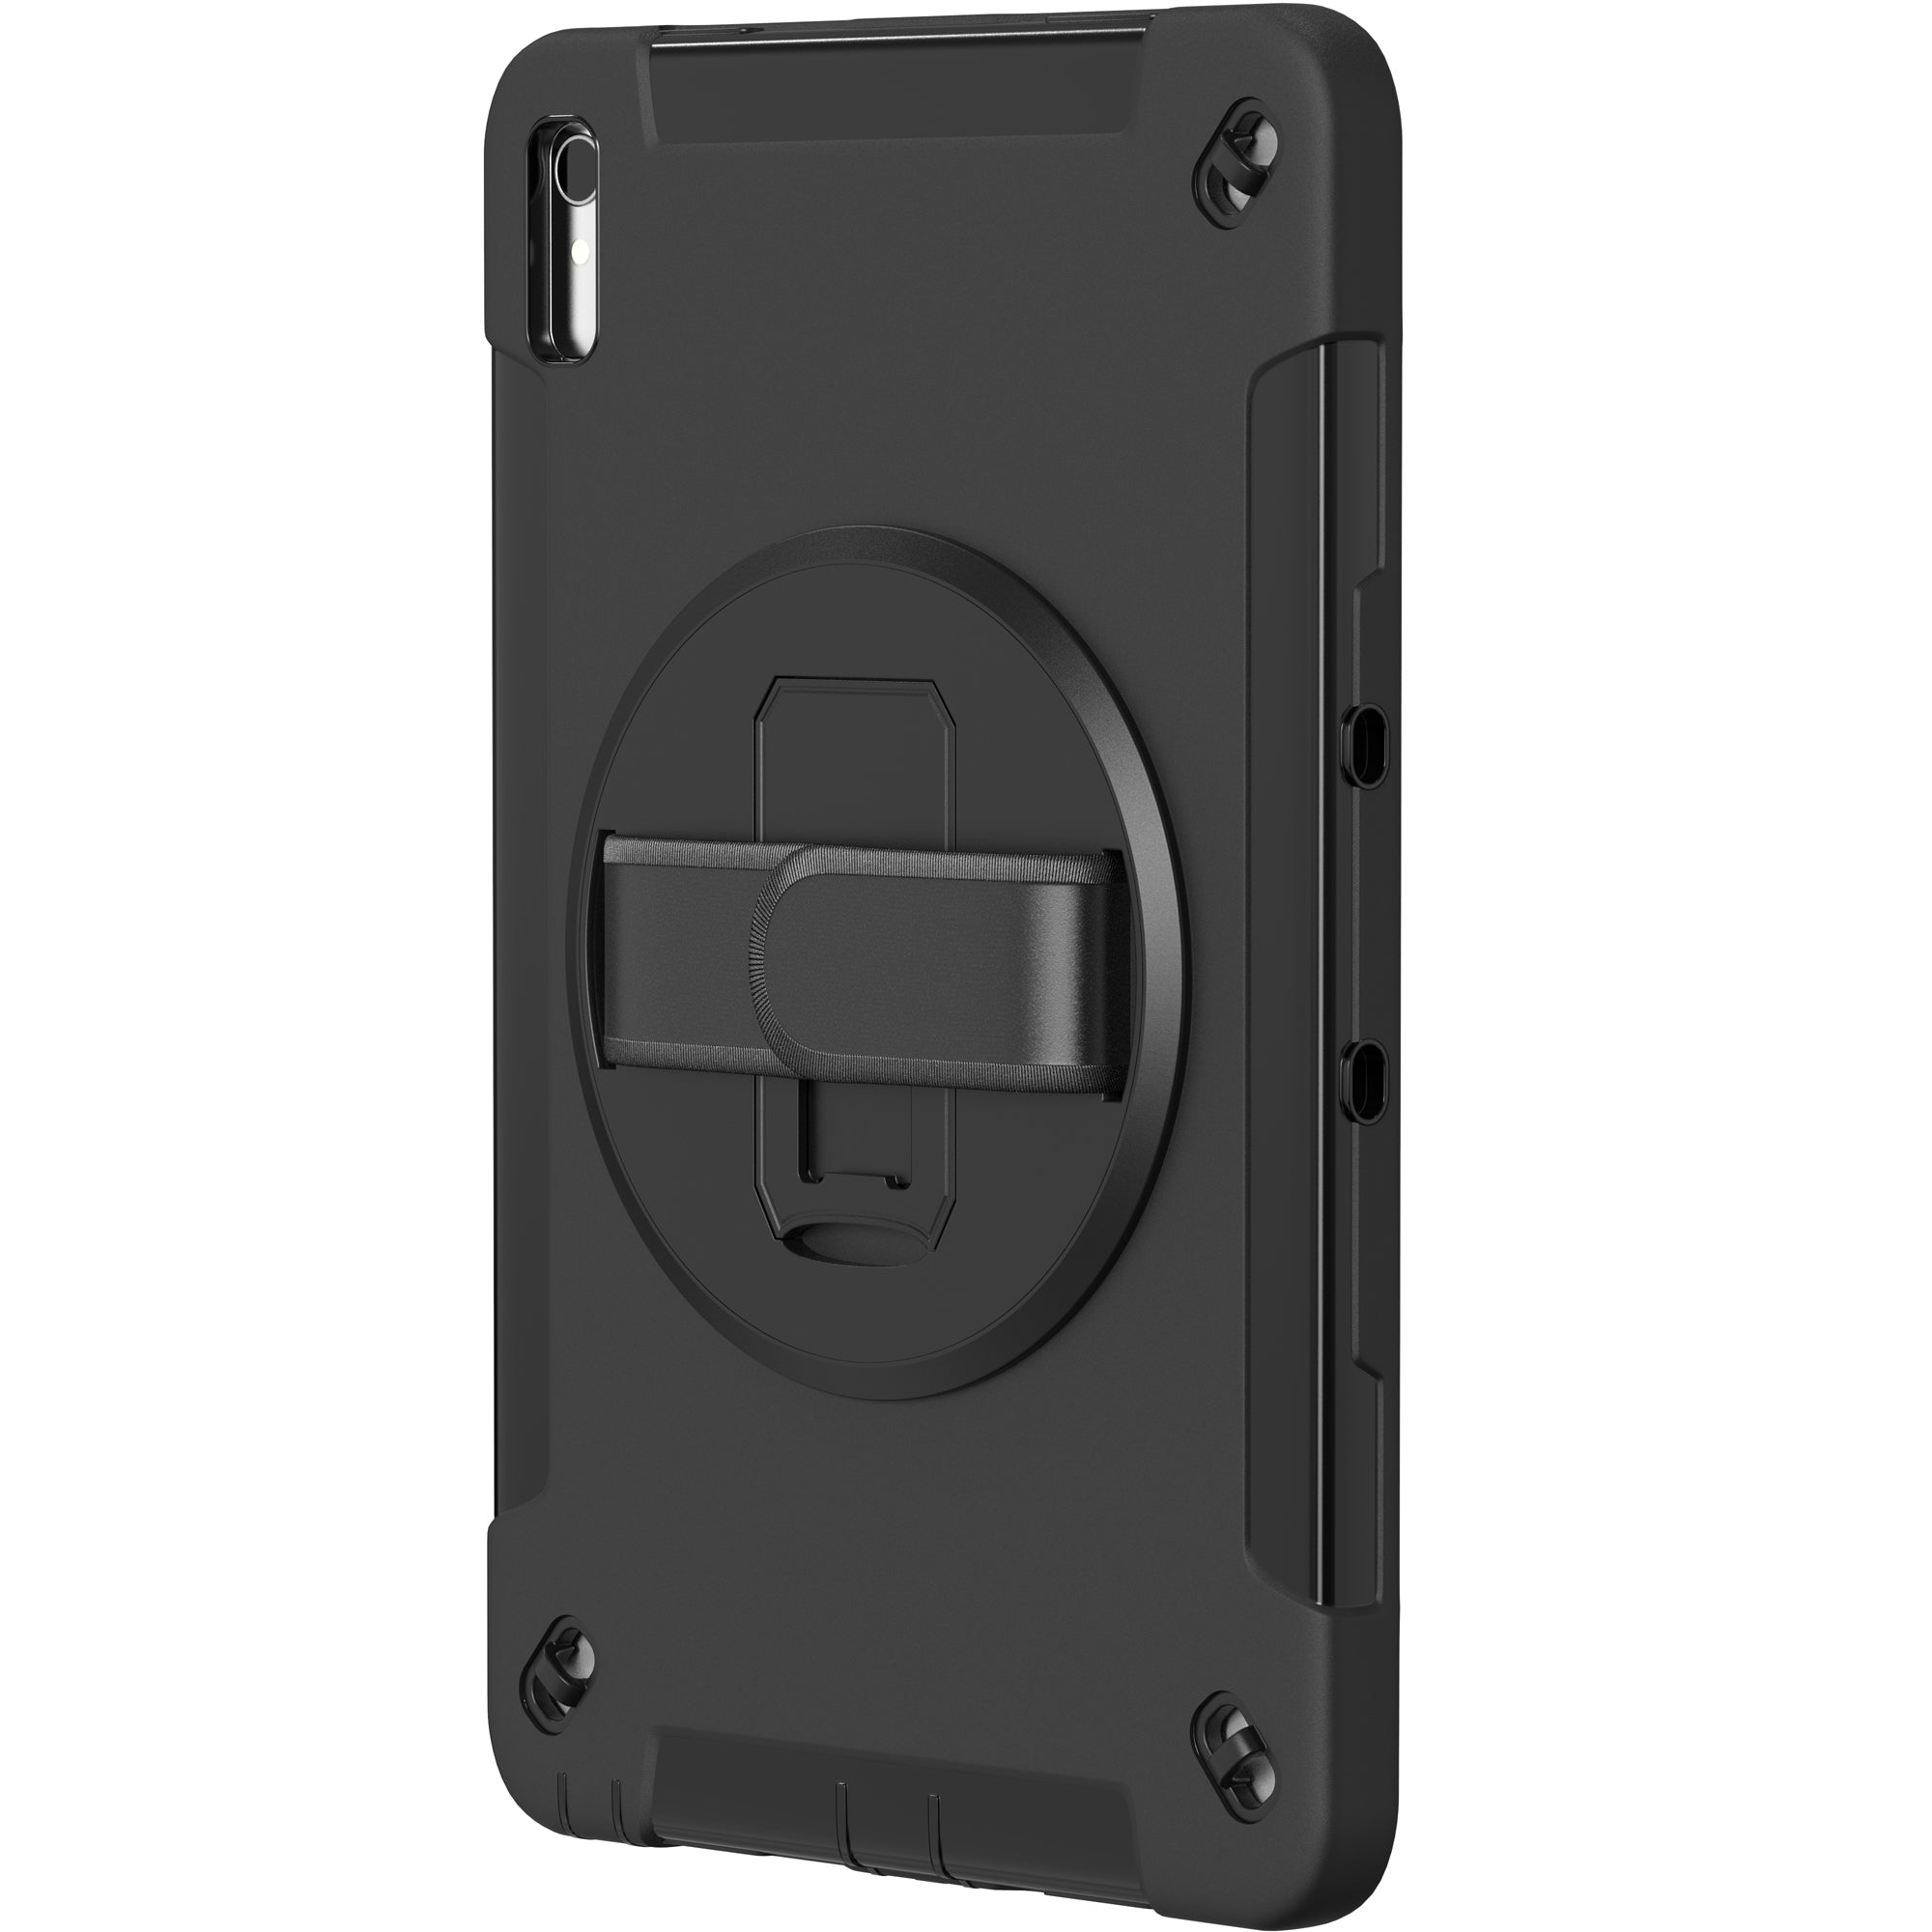 Protective Case with Built-in 360° Rotatable Grip Kickstand for Lenovo P11 Gen 2